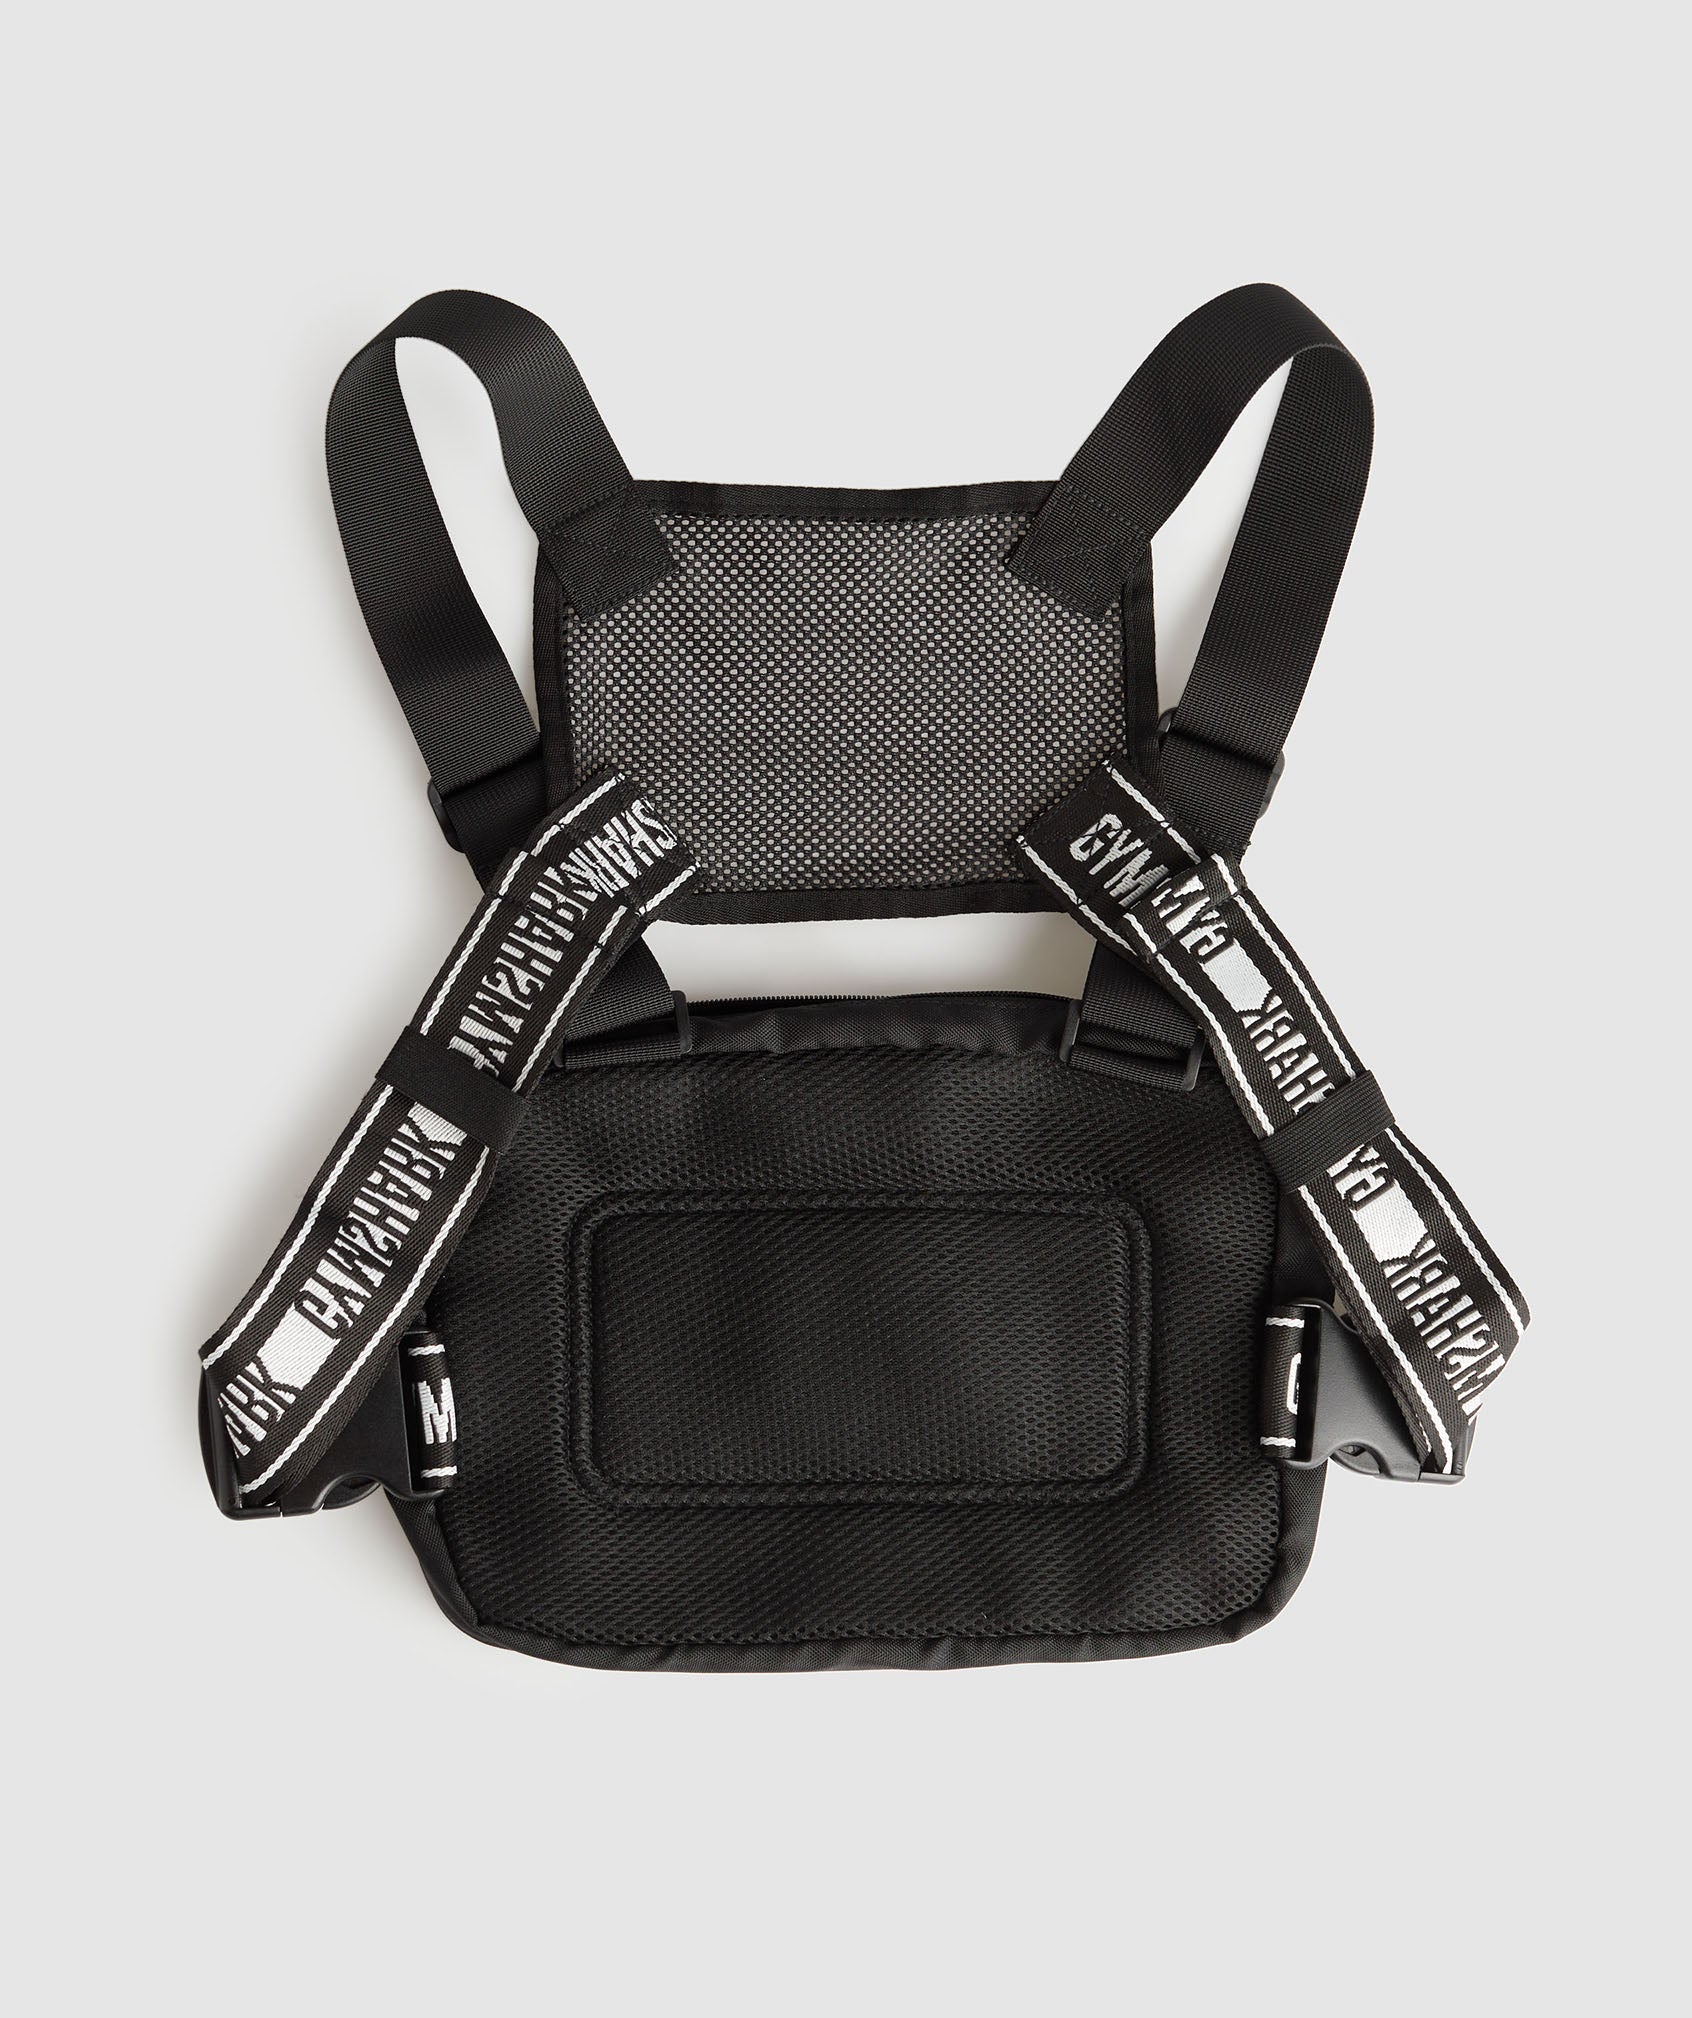 Chest Rig in Black - view 4